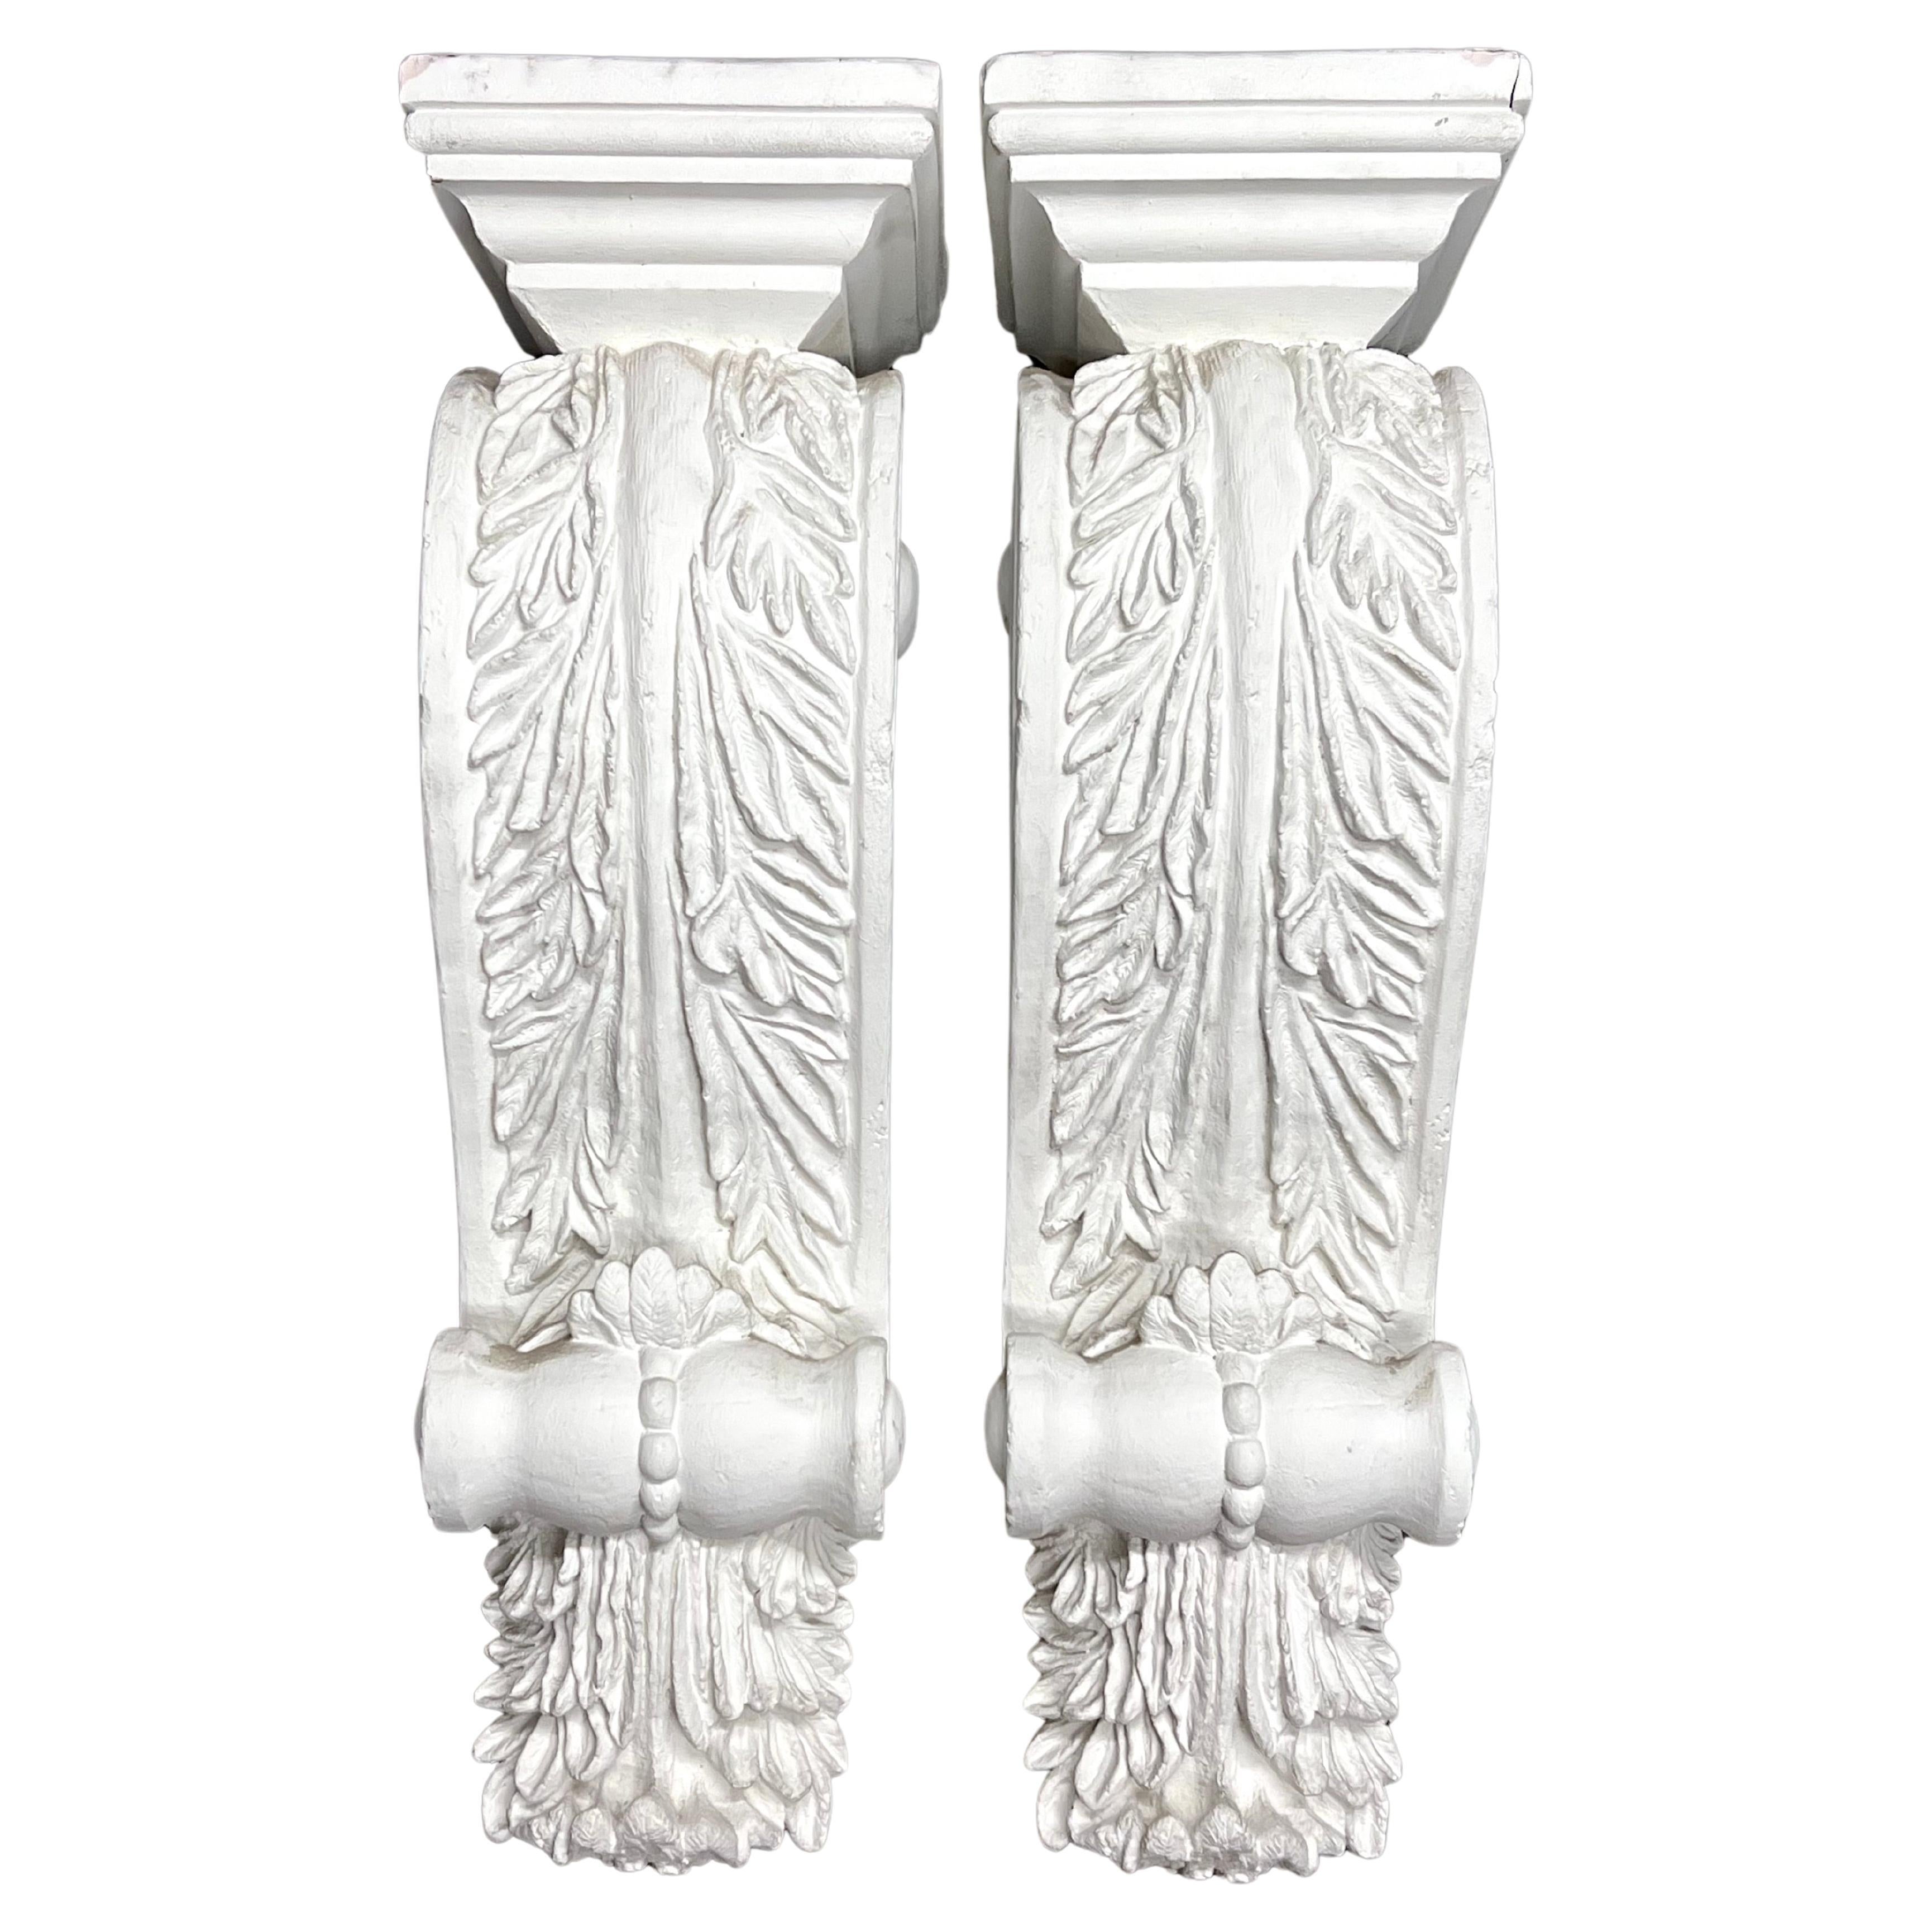 Pair of Patinated White Renaissance Revival Plaster Corbels For Sale